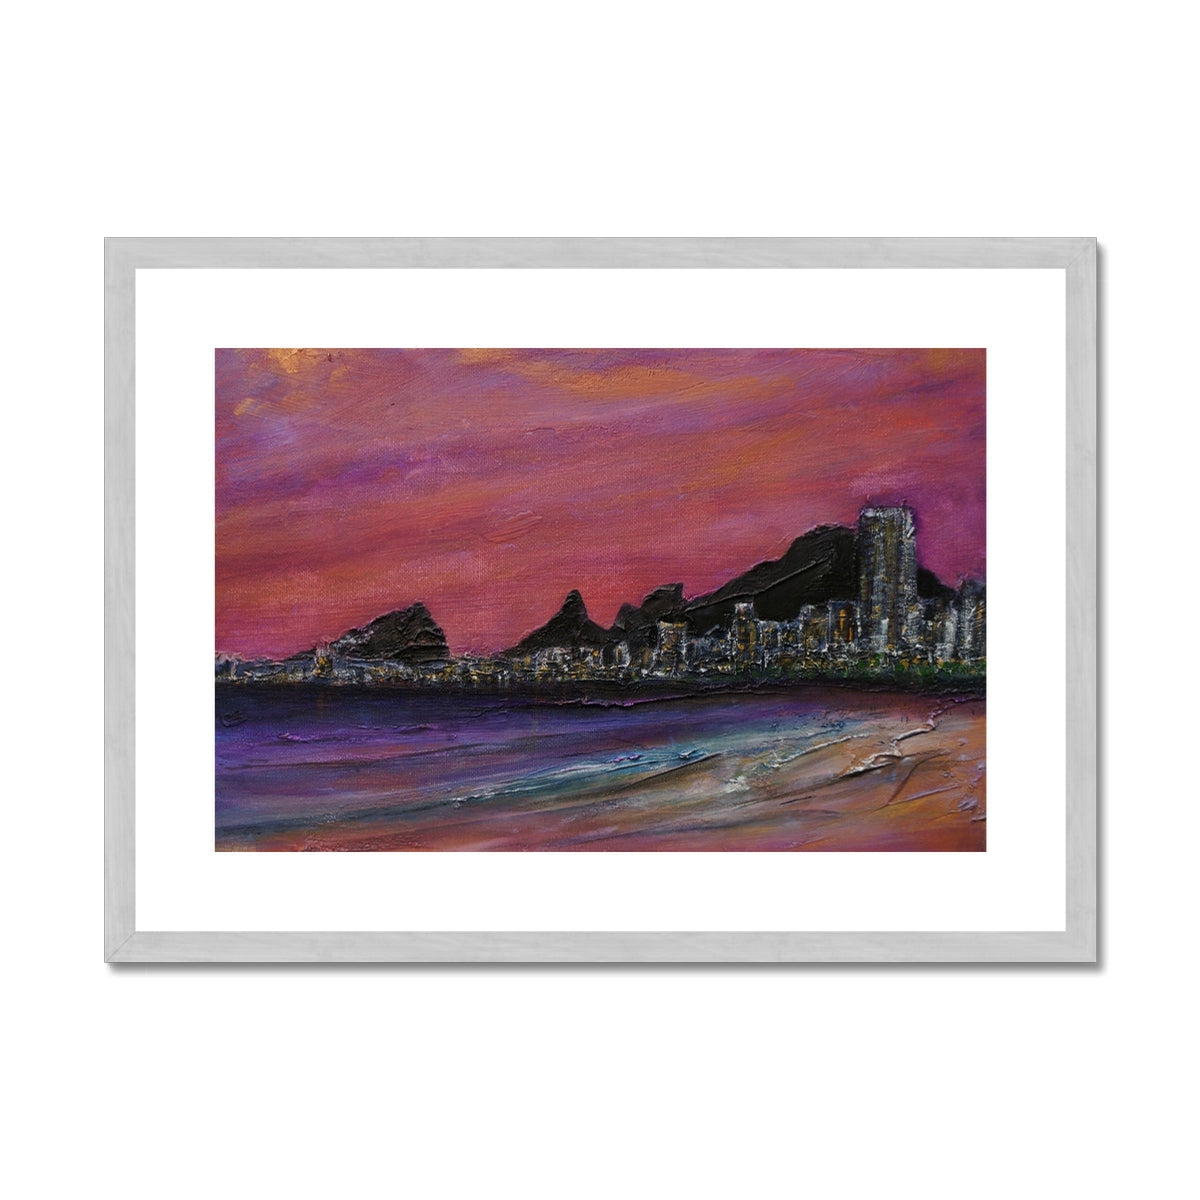 Copacabana Beach Dusk Painting | Antique Framed & Mounted Prints From Scotland-Antique Framed & Mounted Prints-World Art Gallery-A2 Landscape-Silver Frame-Paintings, Prints, Homeware, Art Gifts From Scotland By Scottish Artist Kevin Hunter